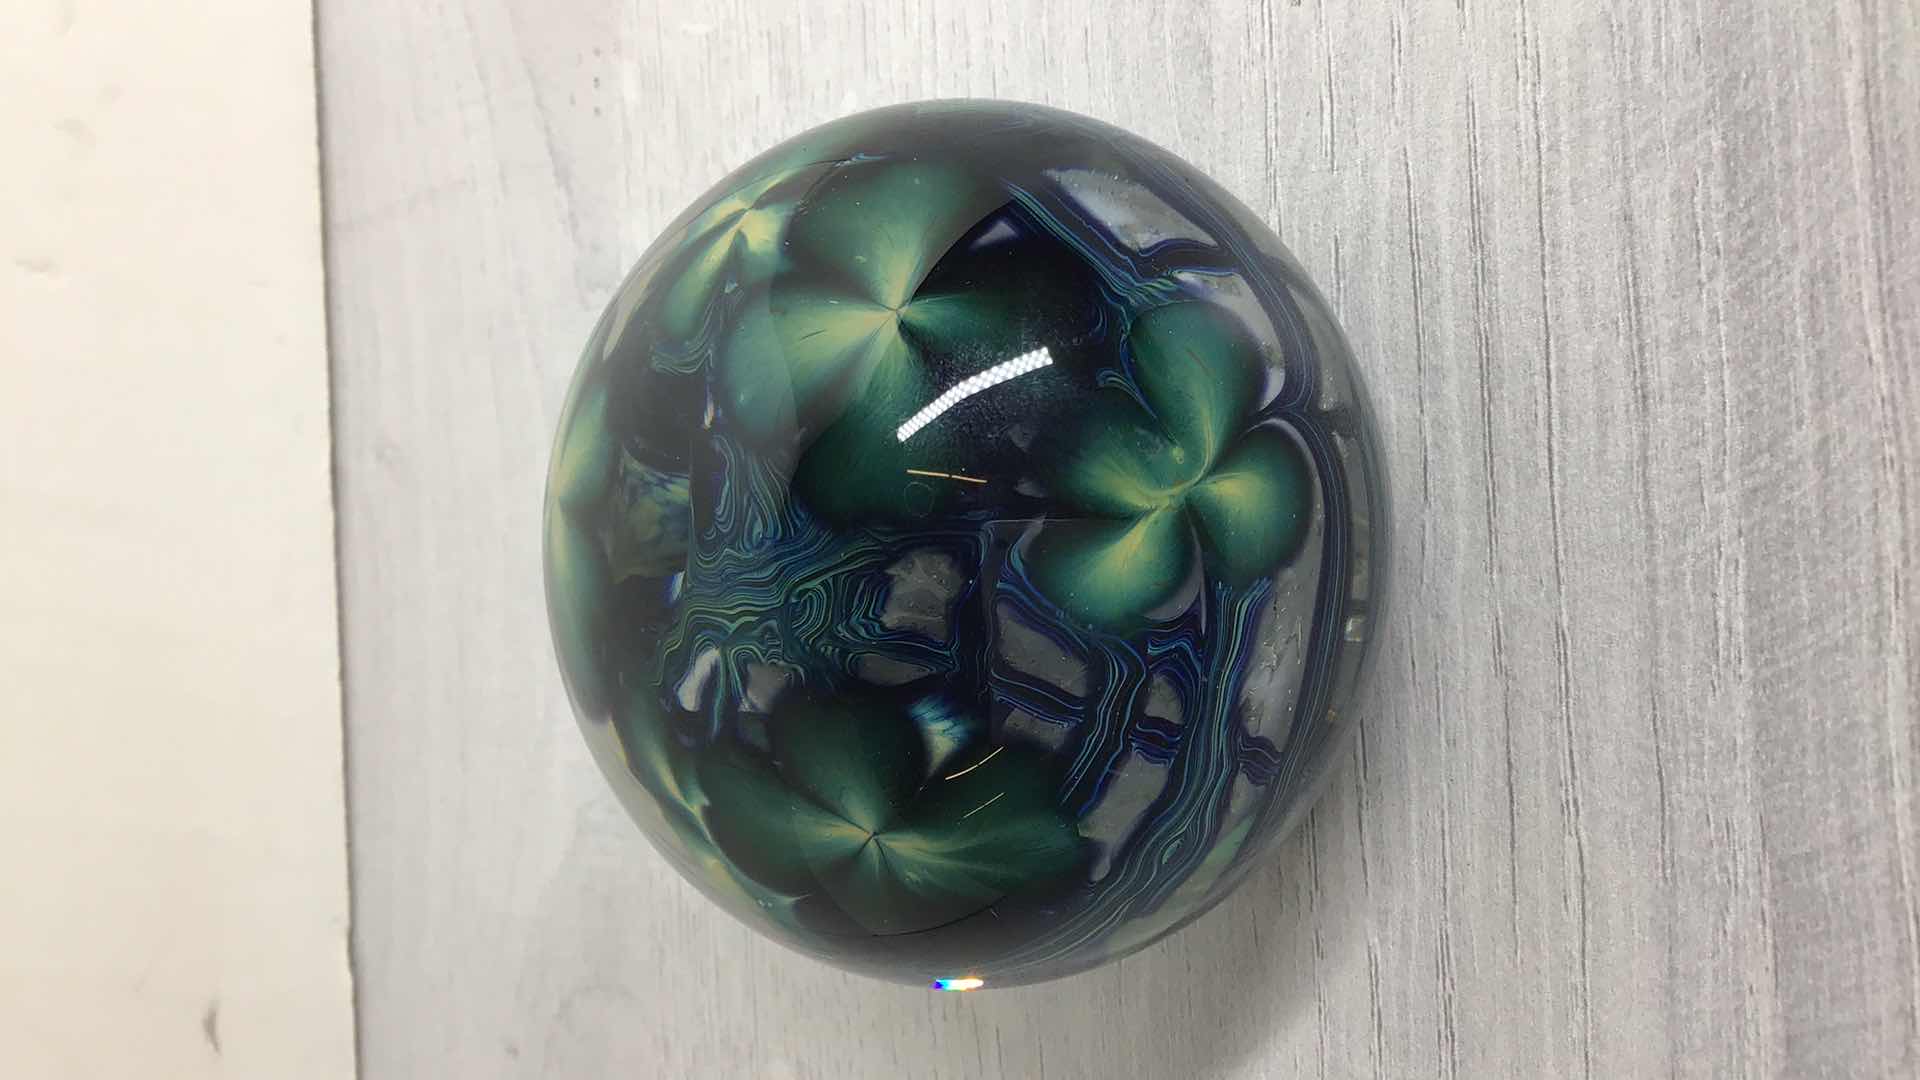 Photo 2 of 4 LEAF CLOVER BLOWN GLASS SPHERE ART SIGNED BY RYAN WOODS 2003 3” X 2.5”